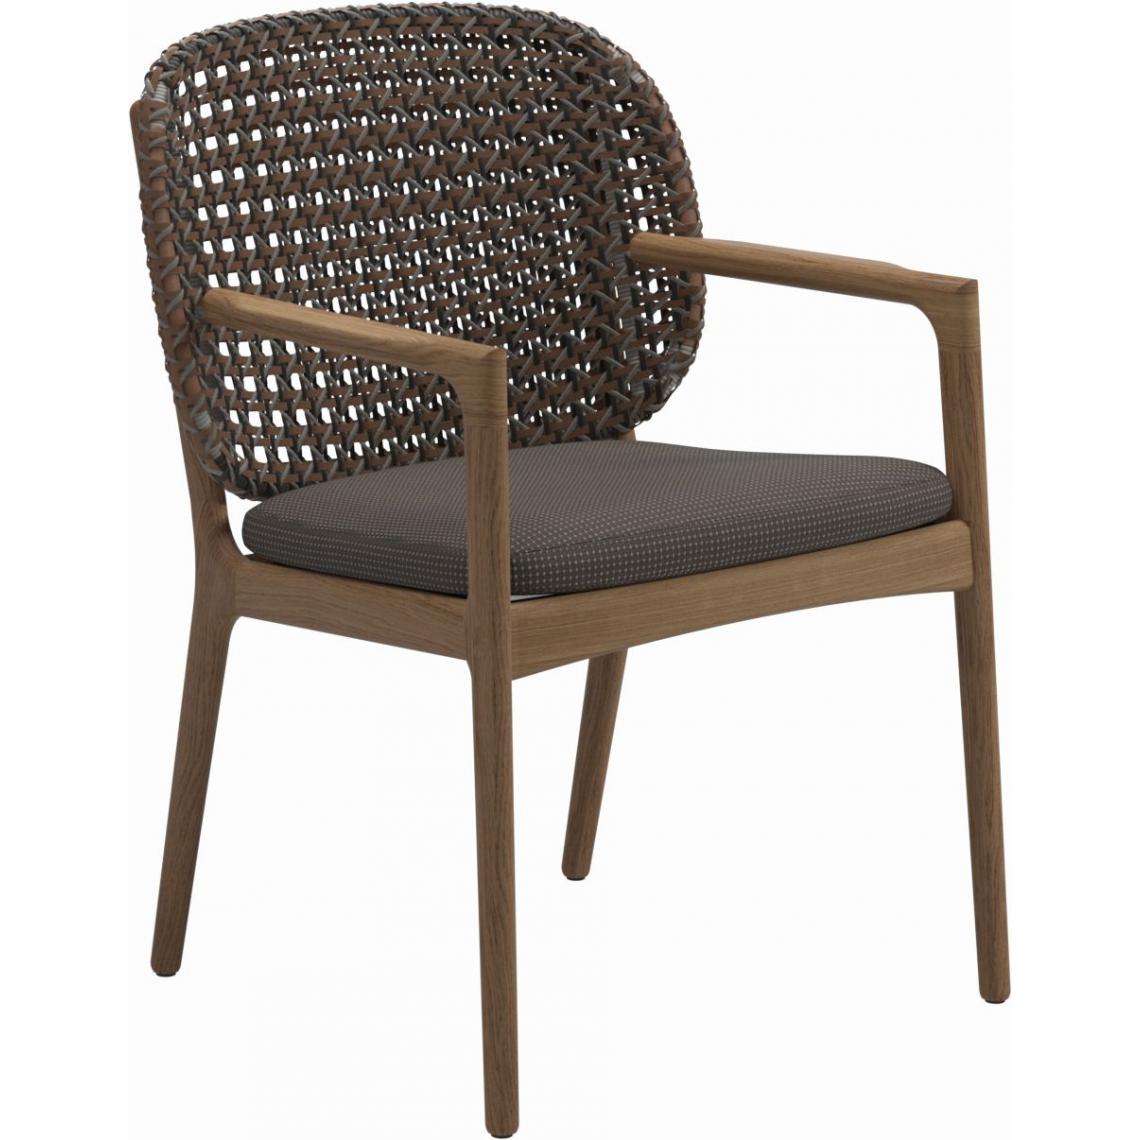 Gloster - Fauteuil Kay - Robben Charcoal - GlosterBrindleWicker - Chaises de jardin